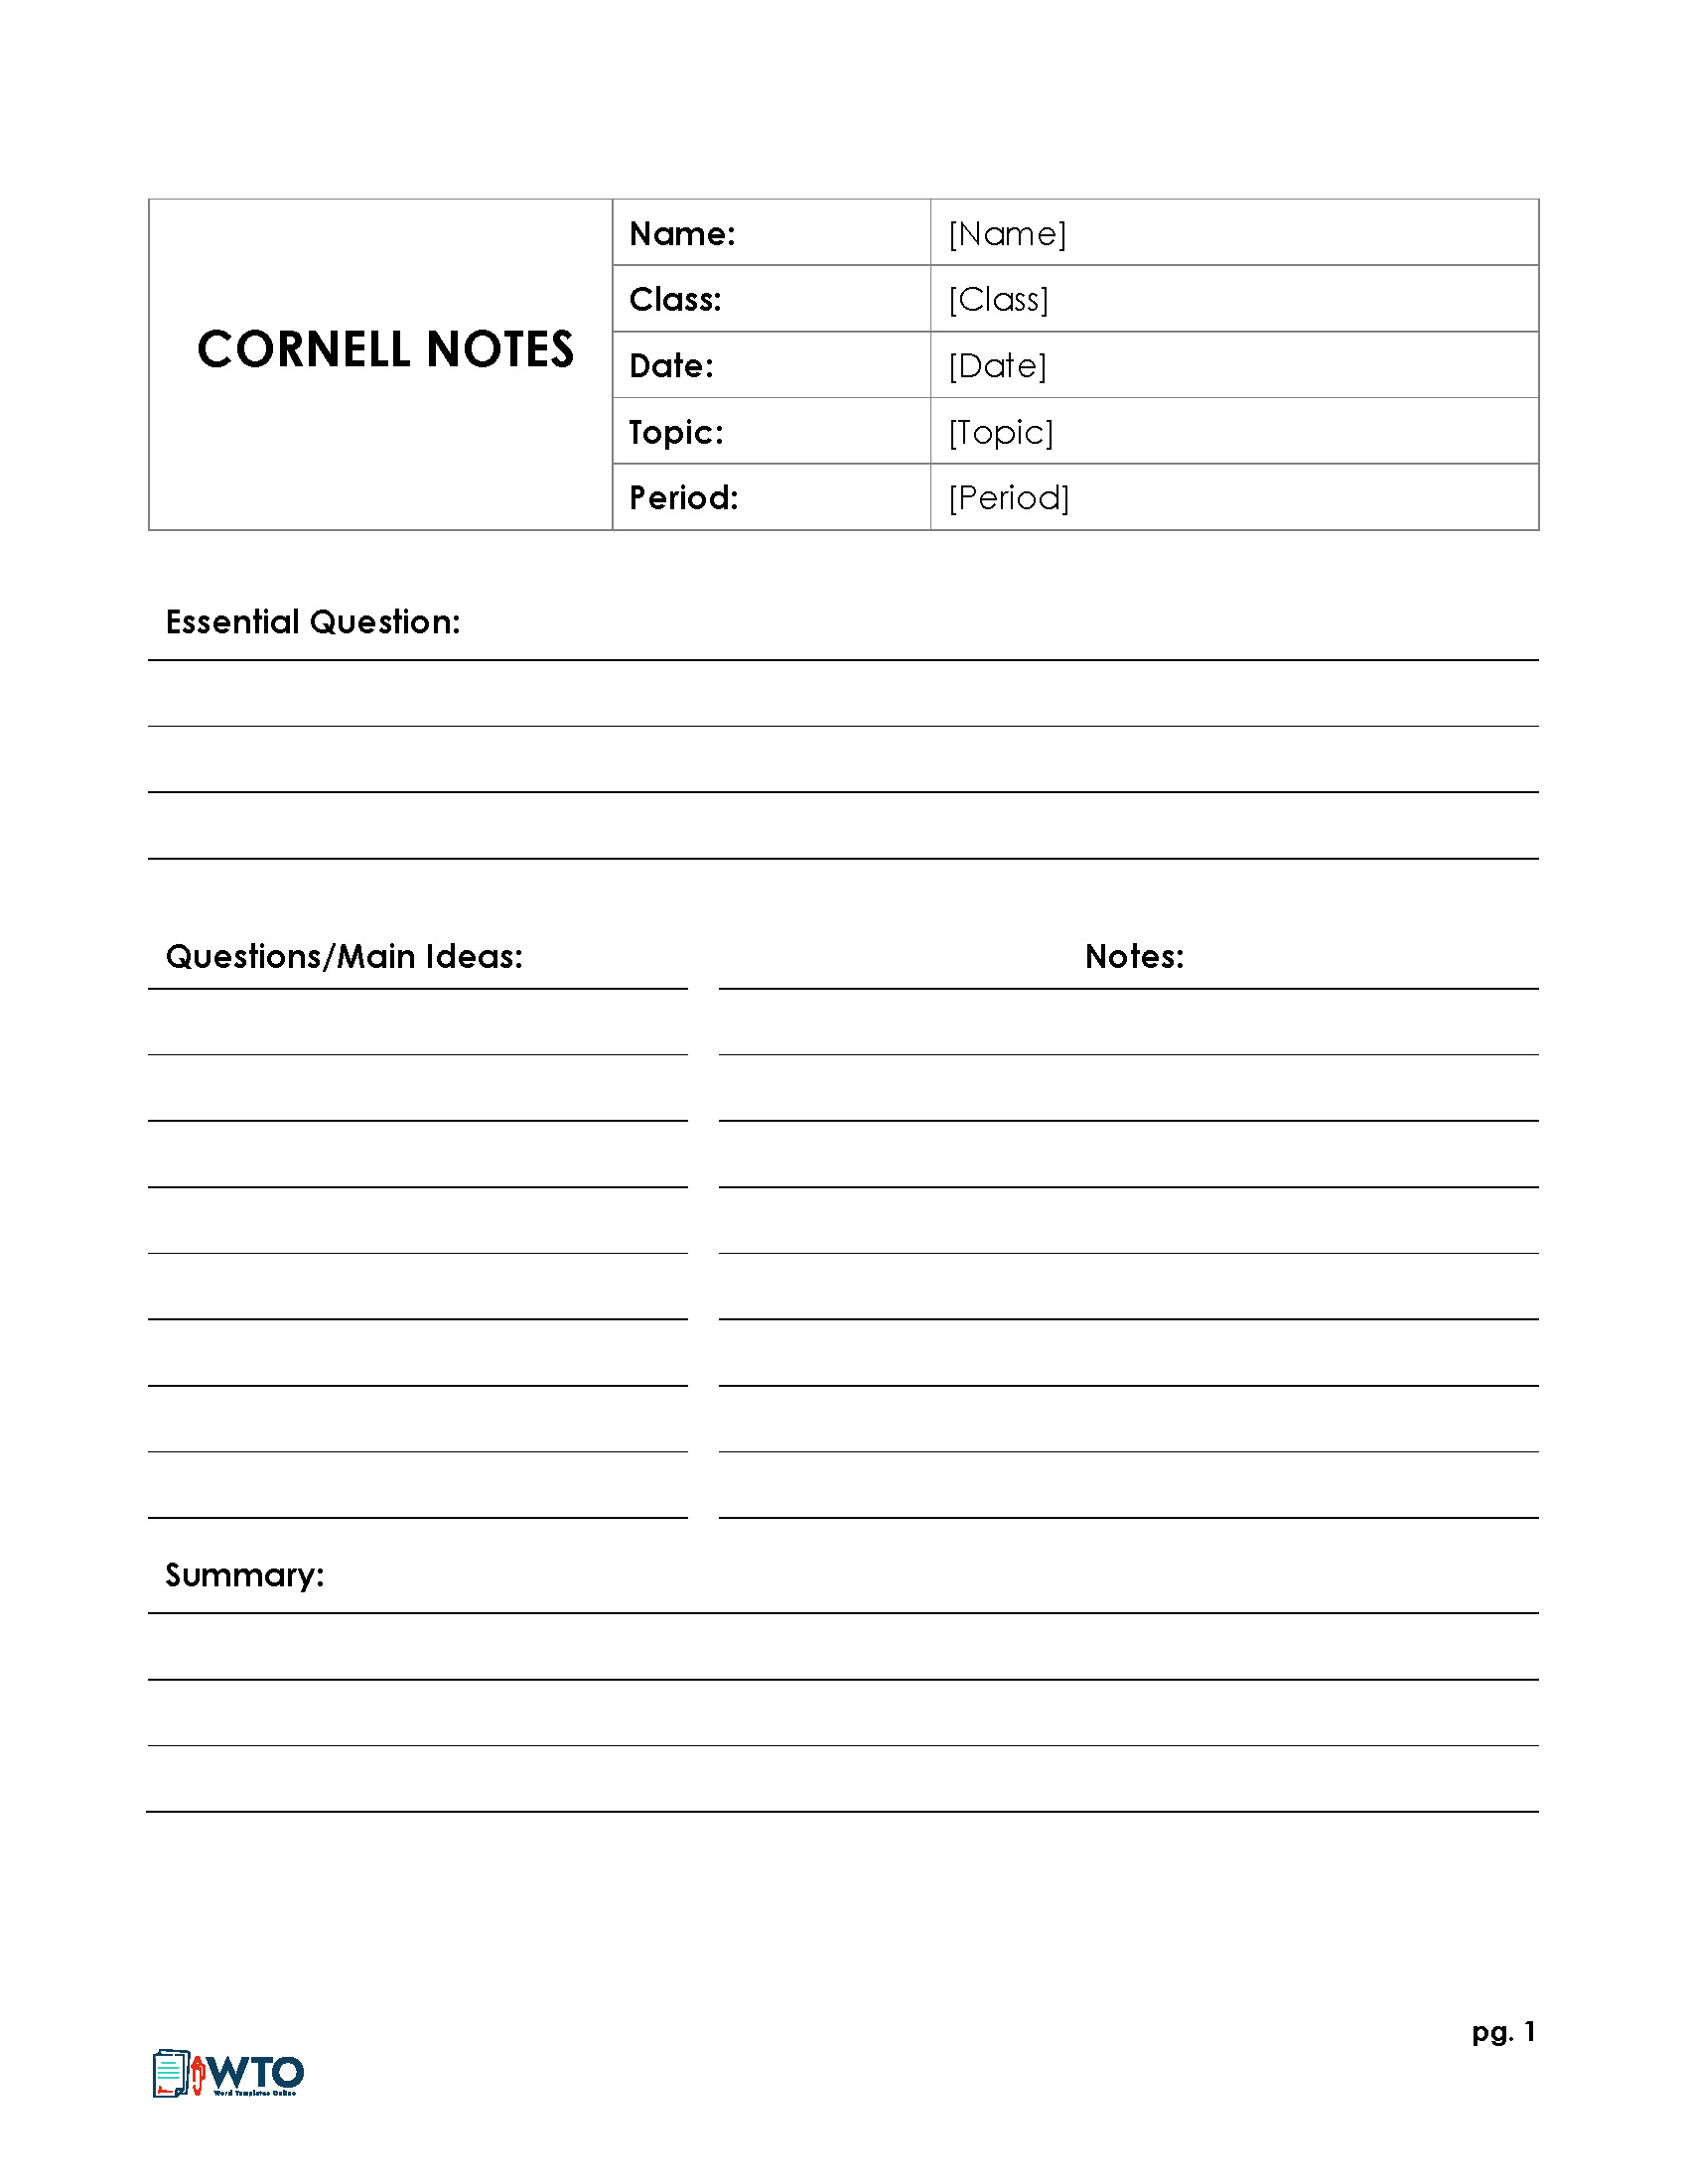 Free Cornell Note Template Word Download